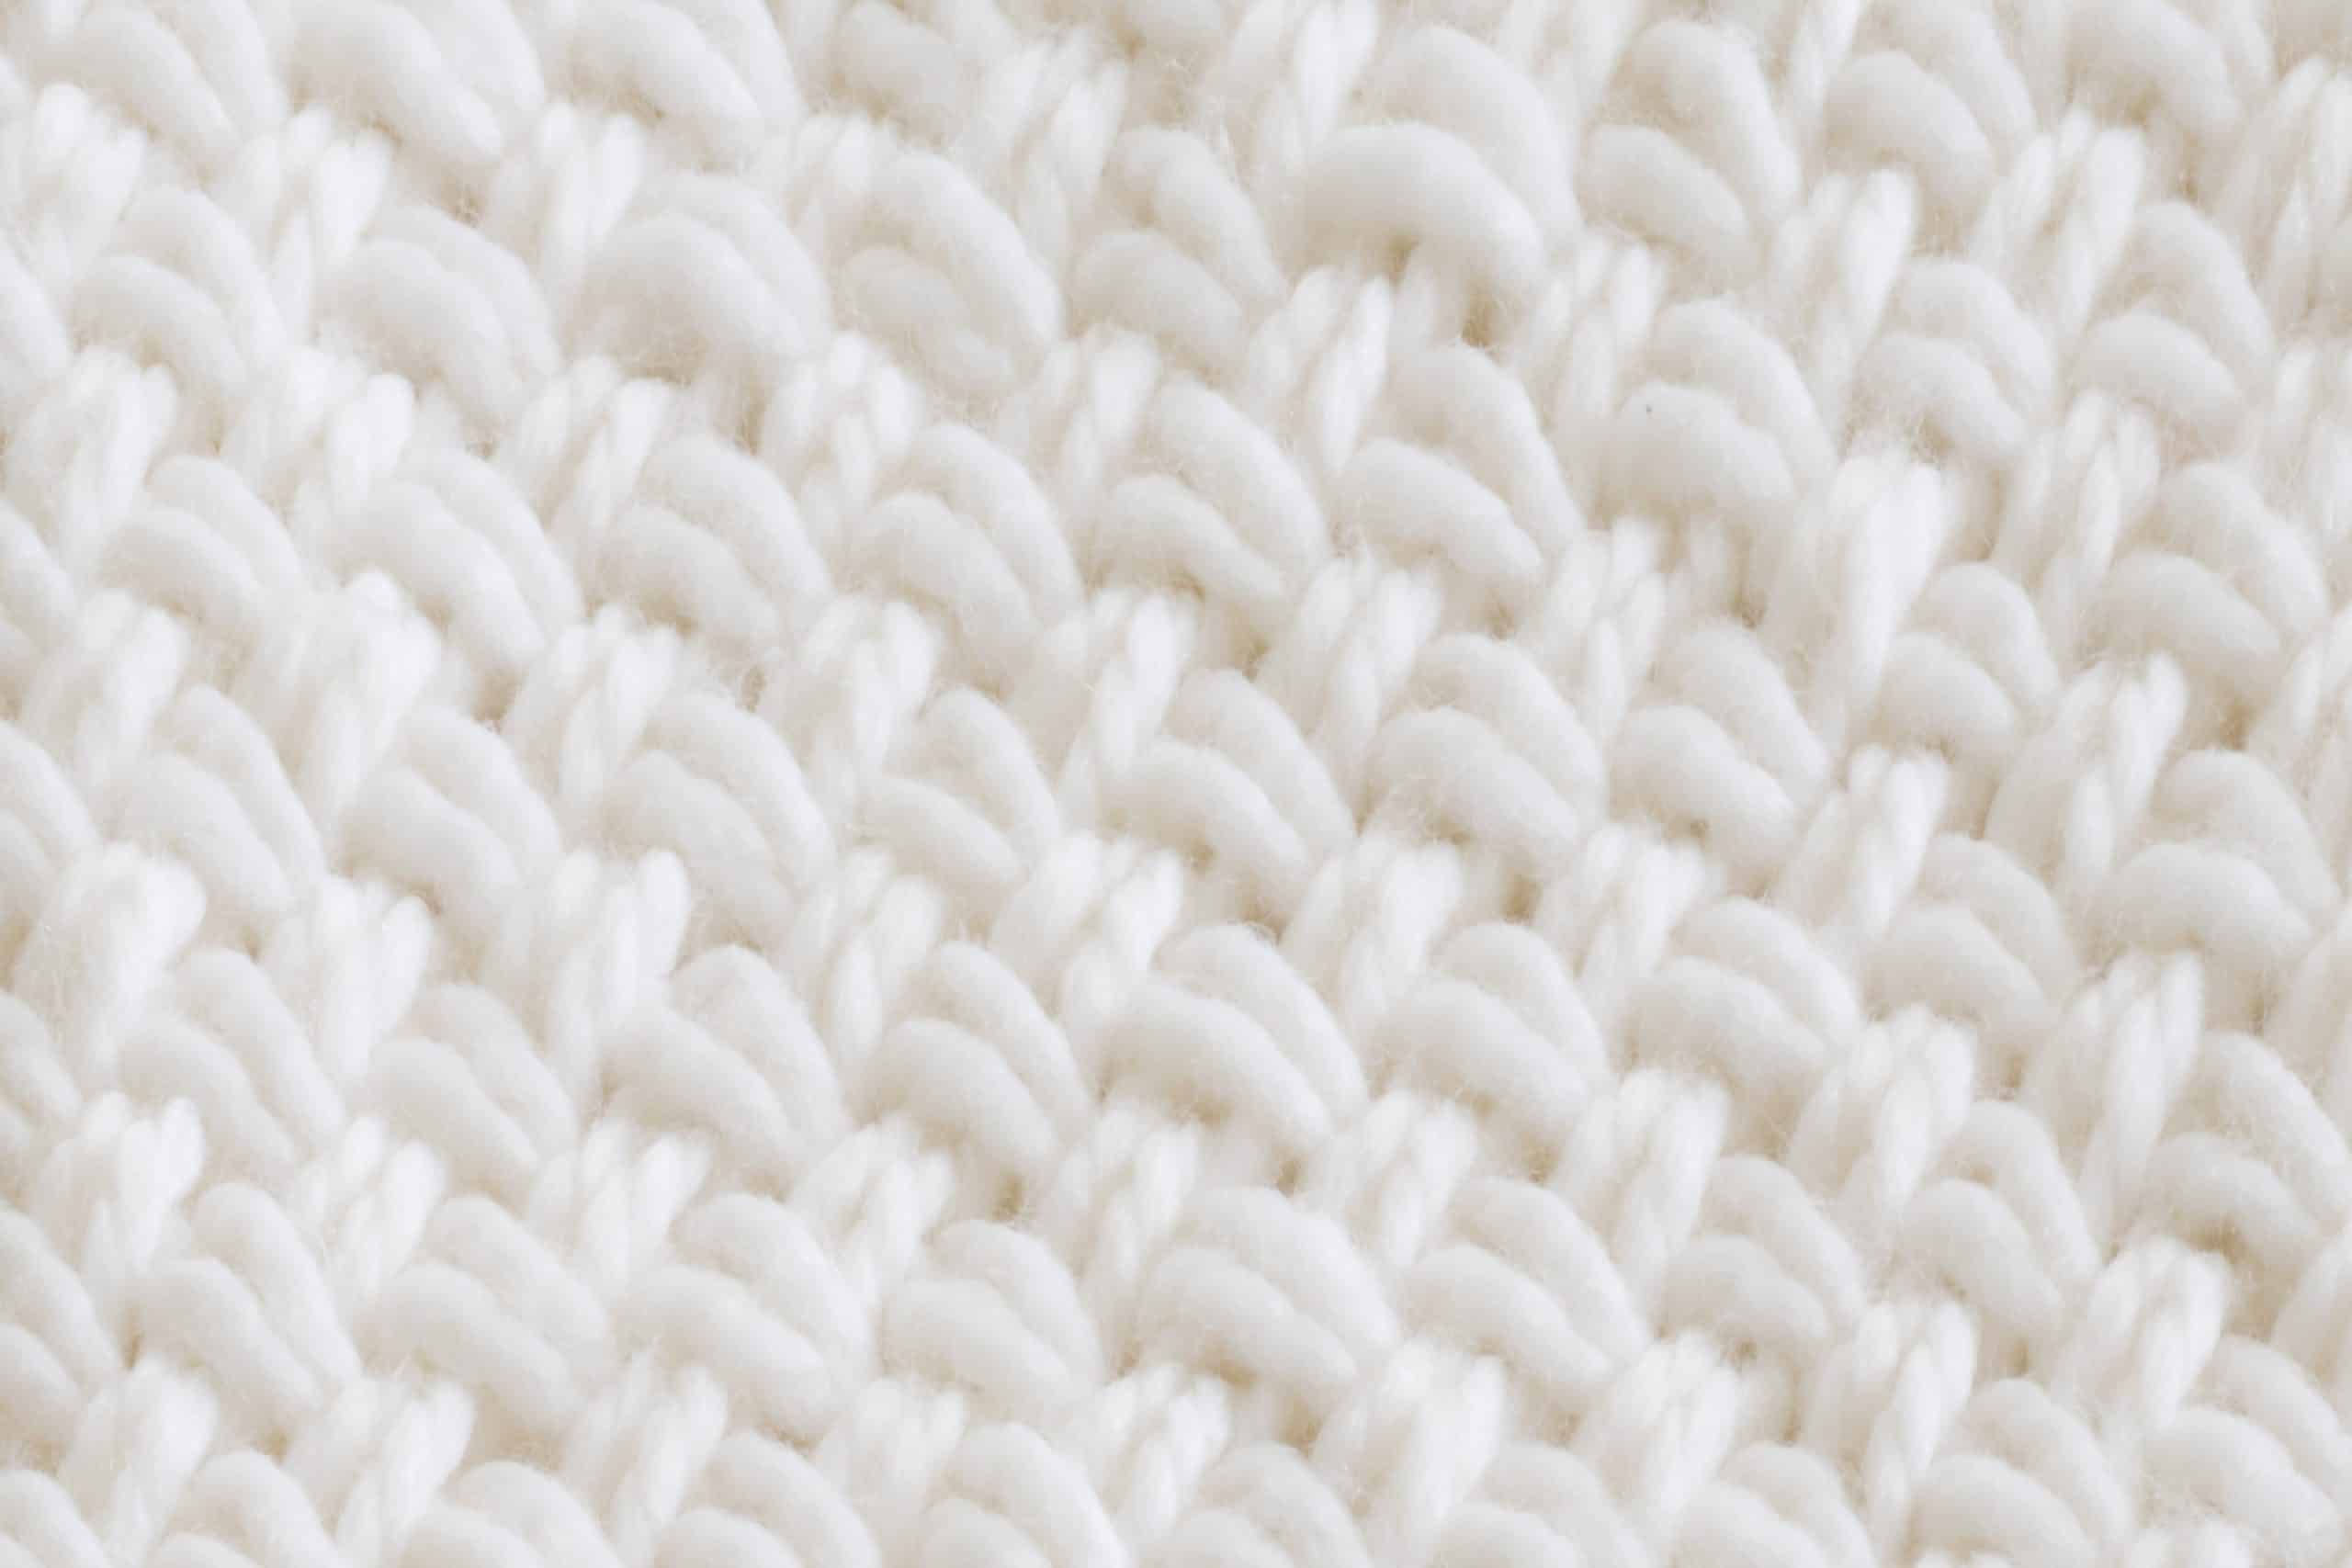 How to Knit the Diagonal Basket Weave Stitch